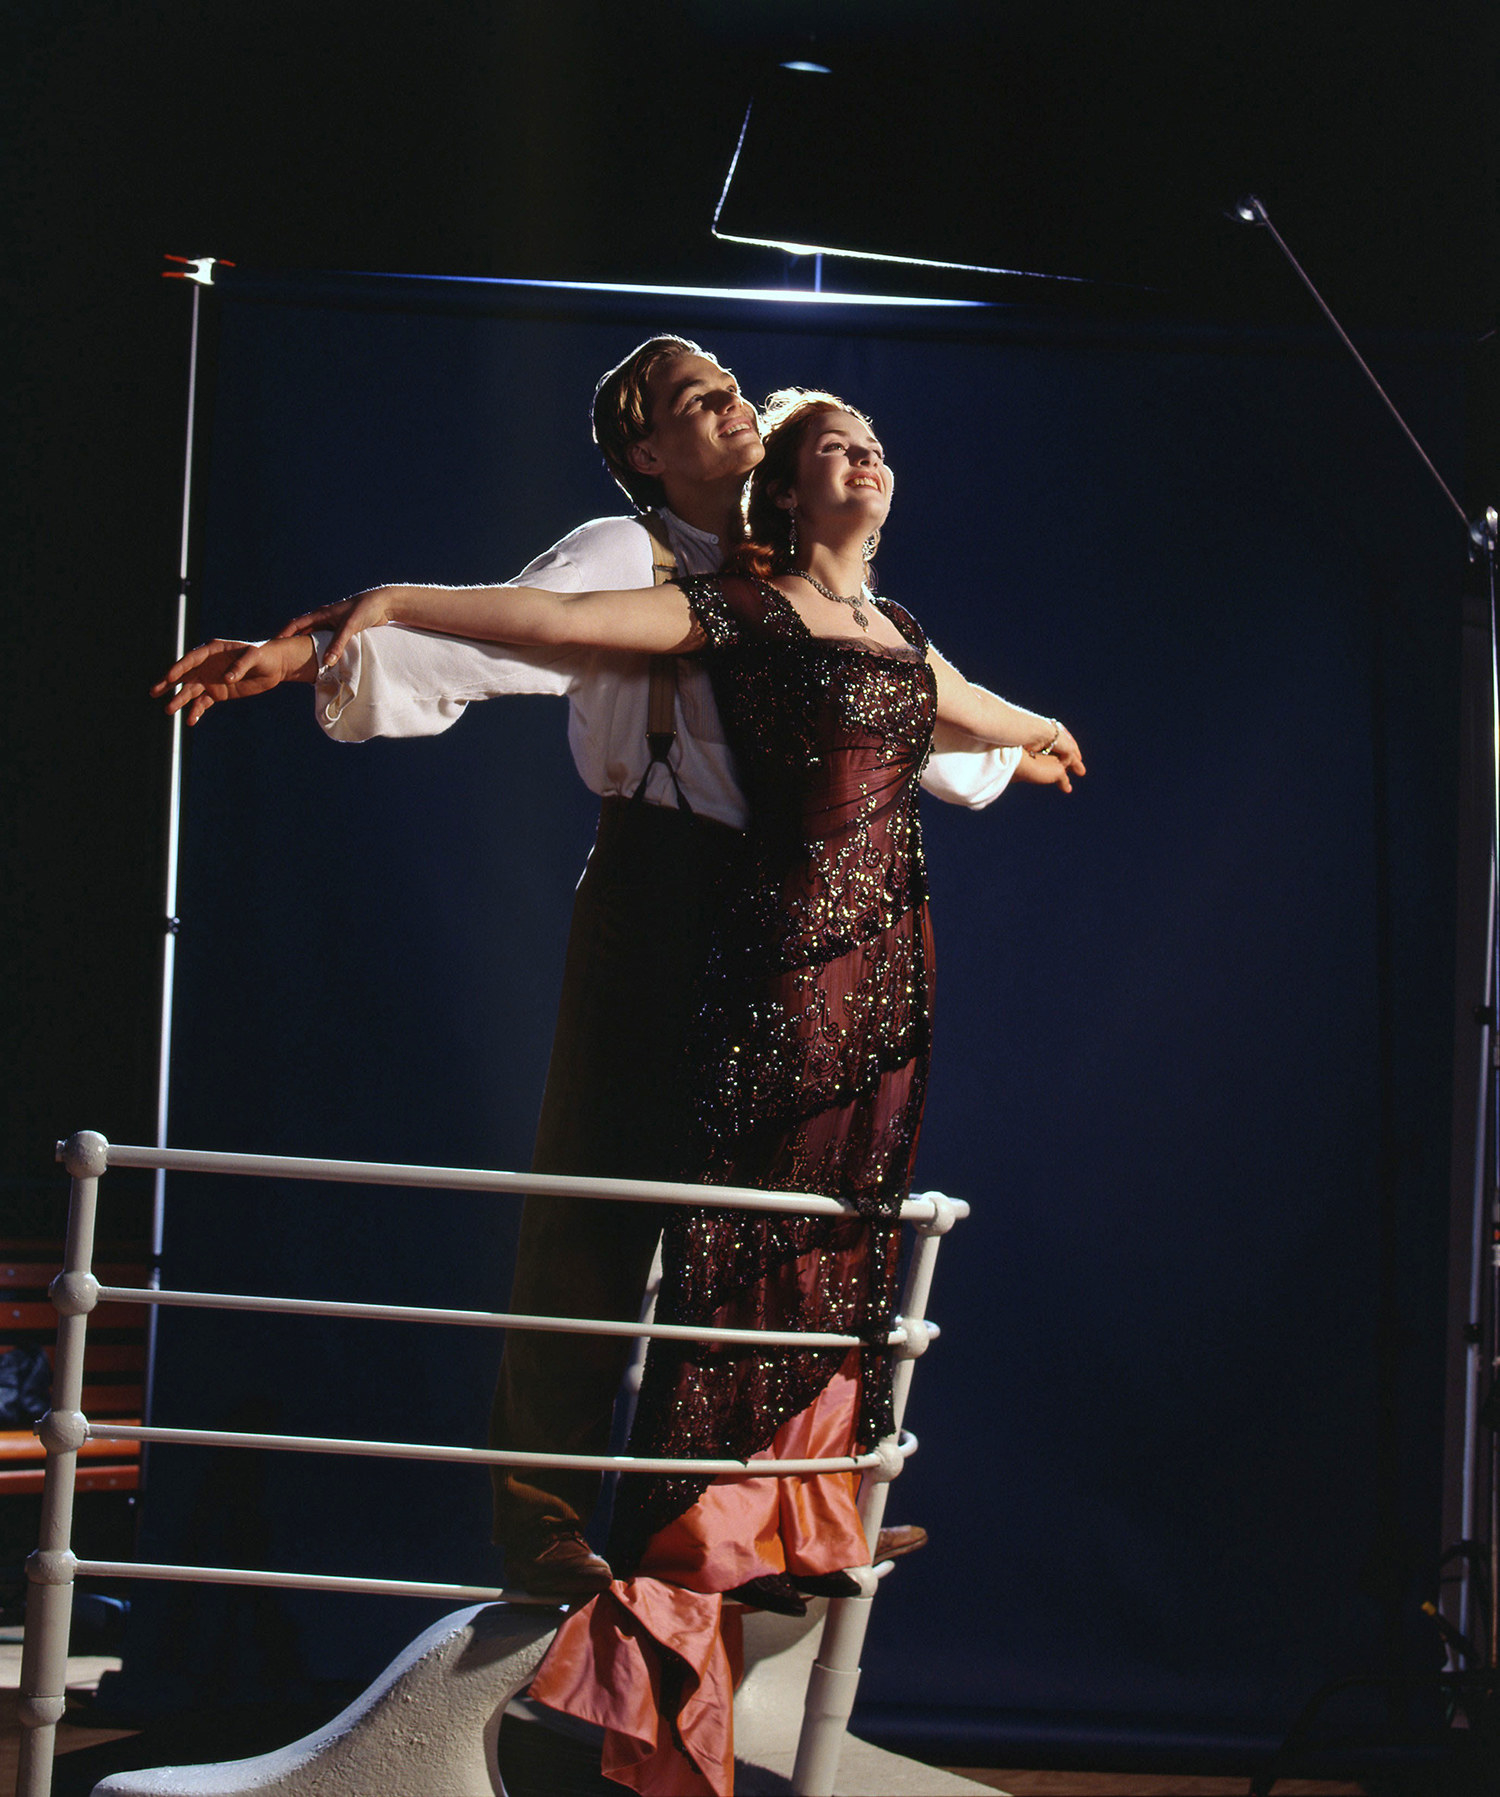 DiCaprio and Winslet with their arms outstretched on the edge of the ship during the famous &quot;I&#x27;m flying&quot; scene